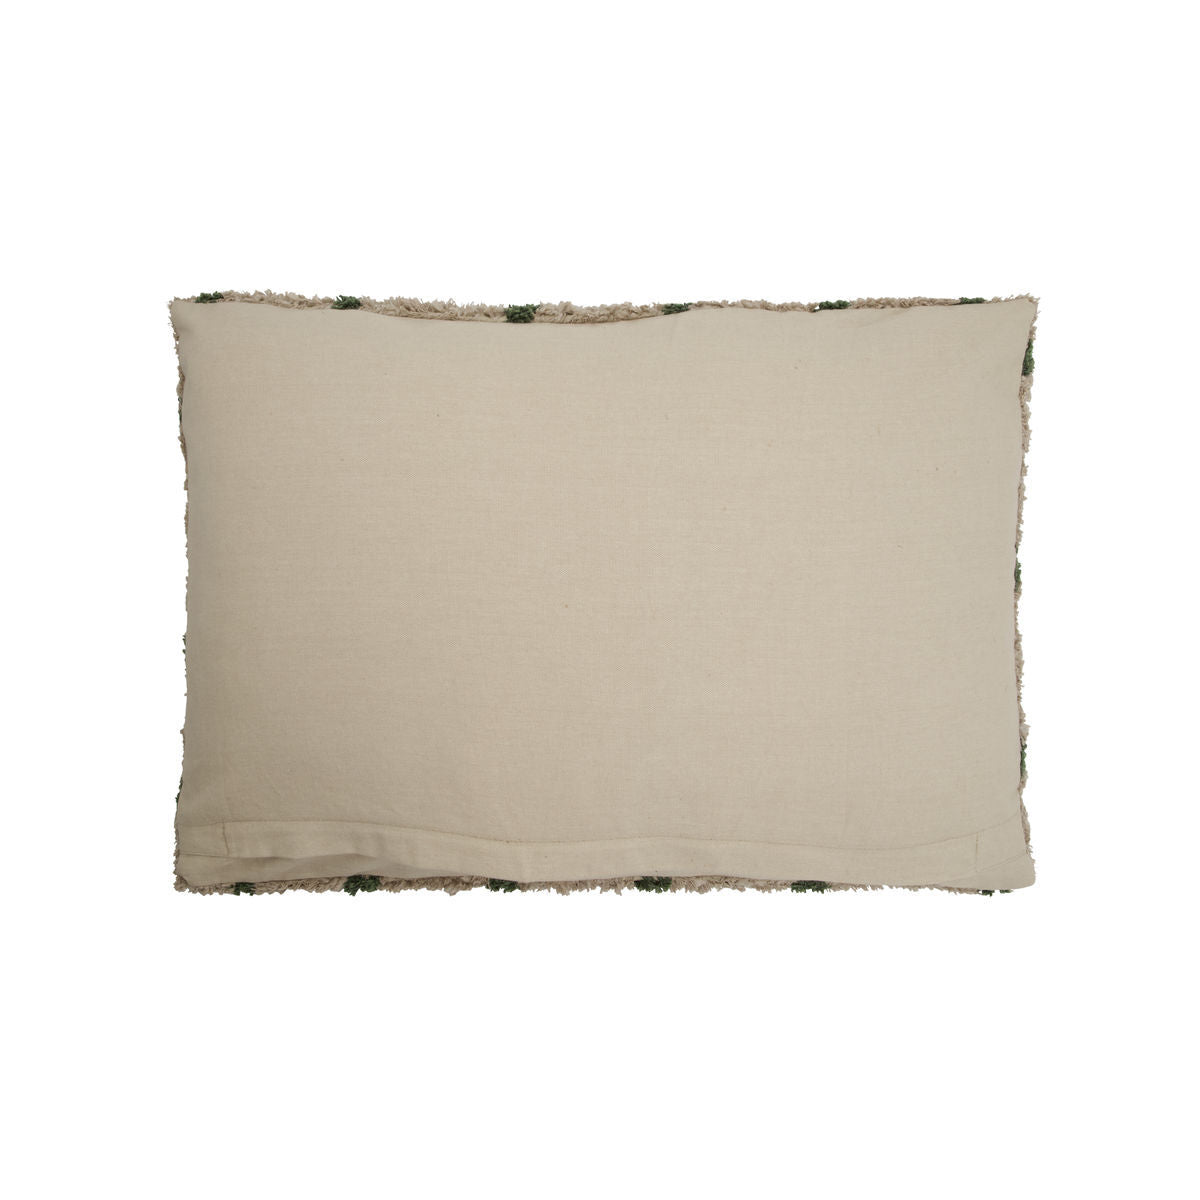 House Doctor Pillow Covers, Hdpilu, Beige